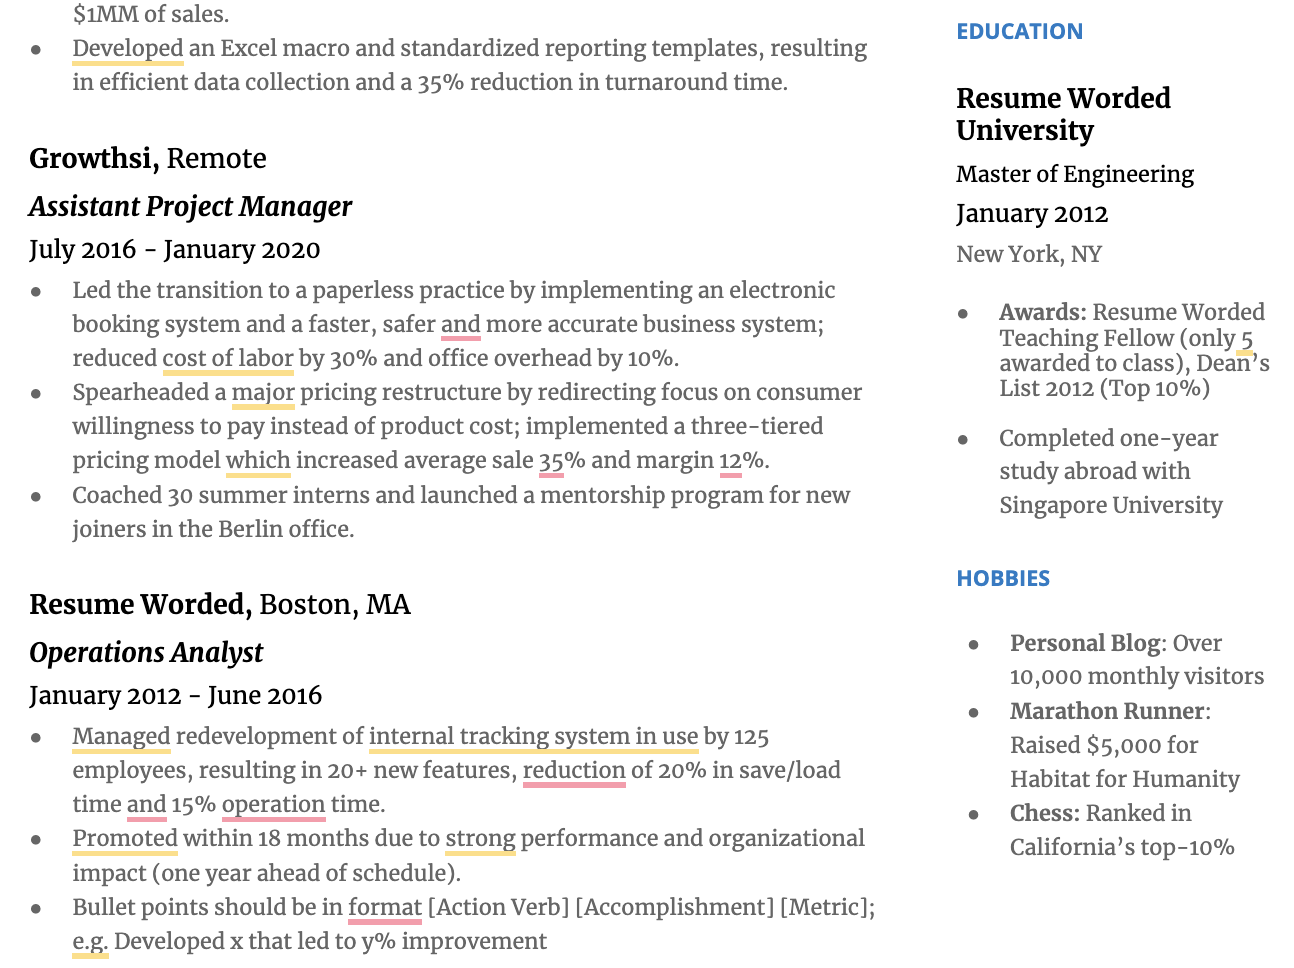 An example of a resume with a dedicated Hobbies section, demonstrating leadership and accomplishment with each hobby